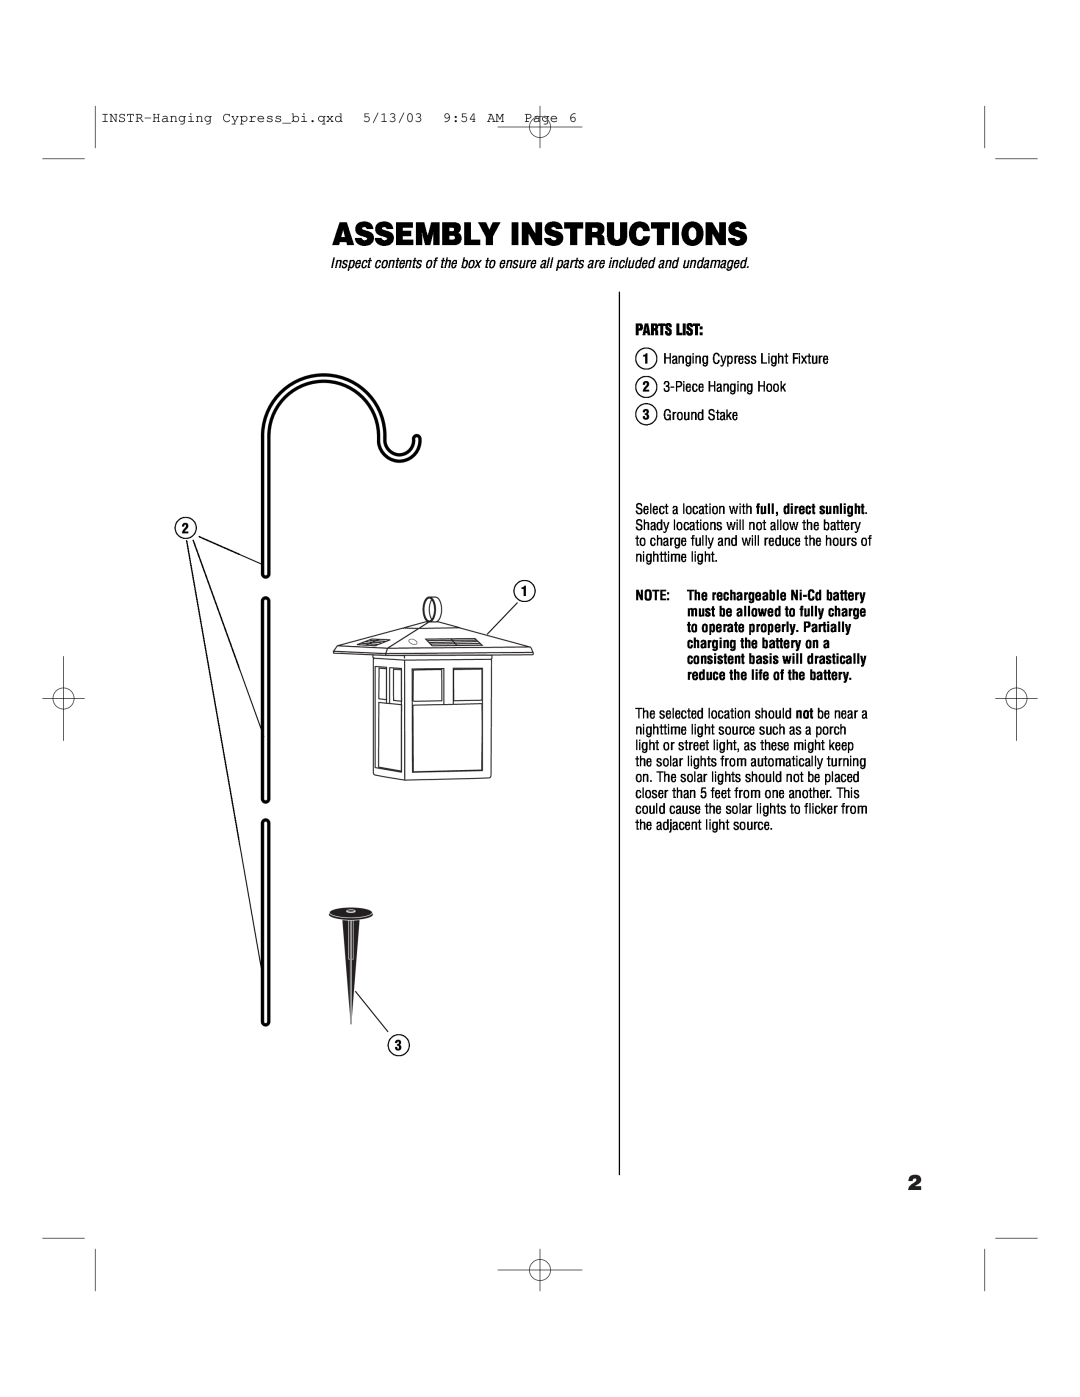 Brinkmann 822-1506-B owner manual Assembly Instructions, Parts List, INSTR-Hanging Cypressbi.qxd 5/13/03 954 AM Page 